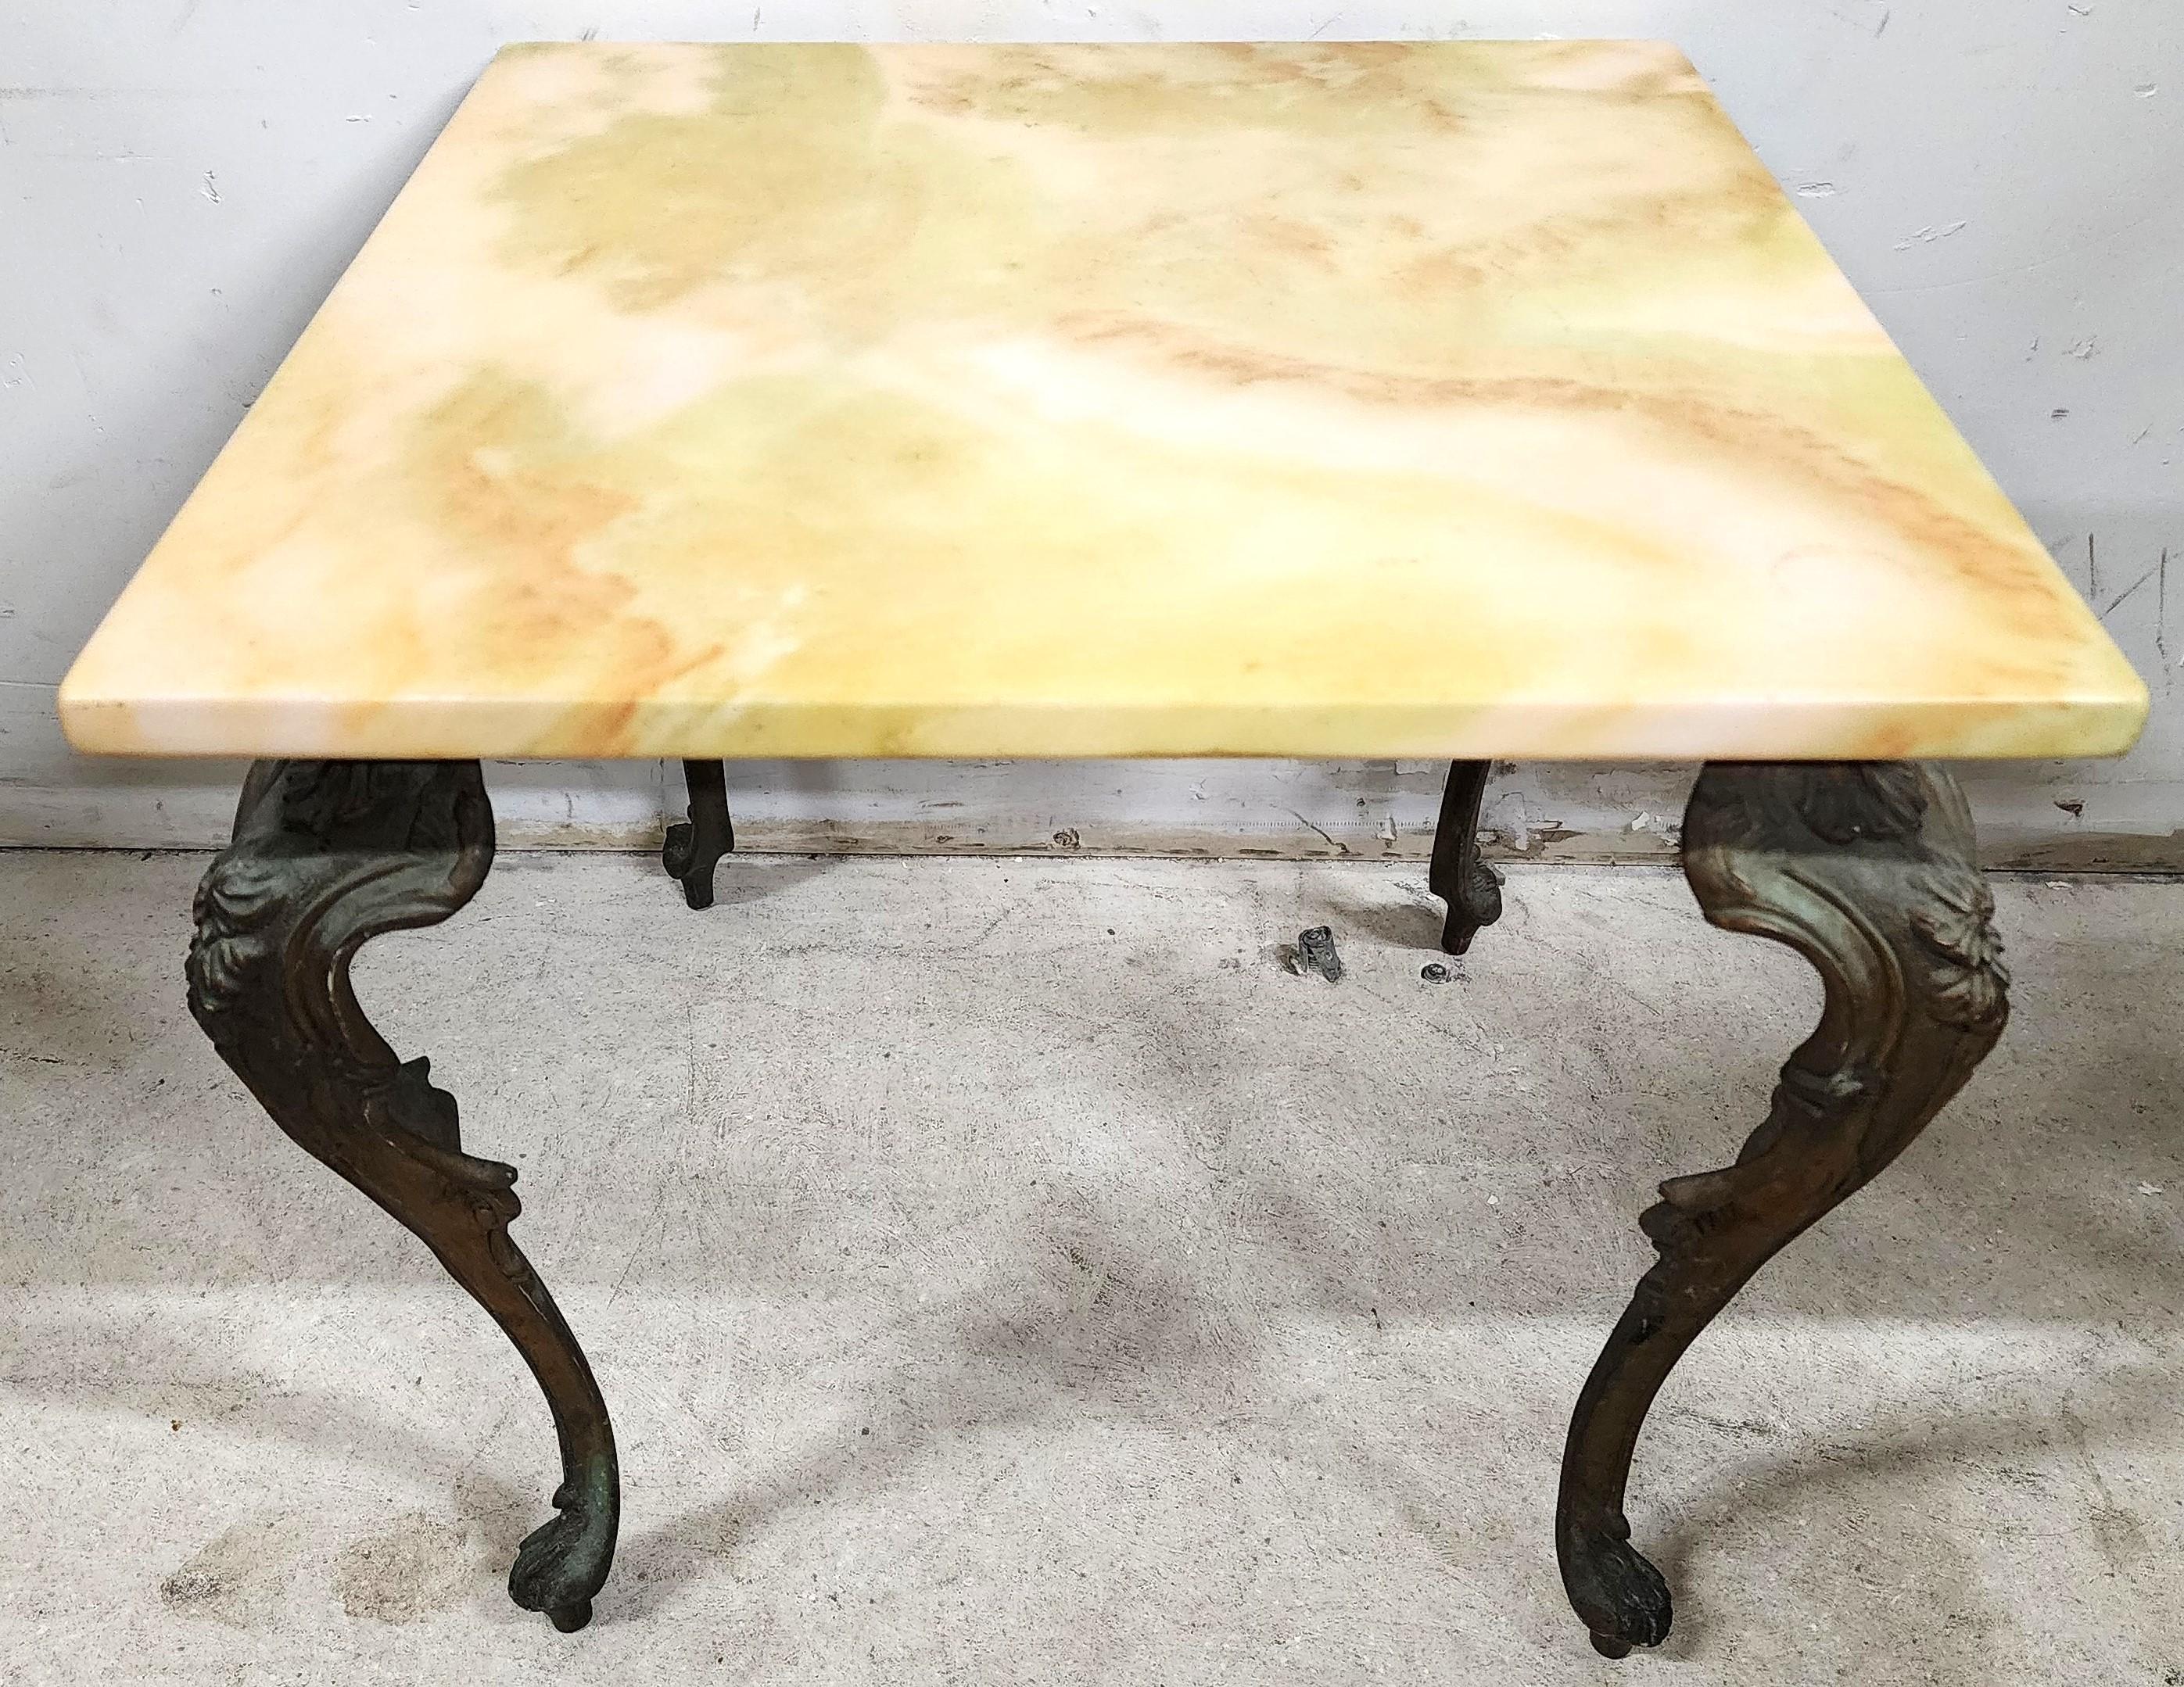 For FULL item description click on CONTINUE READING at the bottom of this page.

Offering One Of Our Recent Palm Beach Estate Fine Furniture Acquisitions Of A
Vintage French Louis XV Style Brass/Bronze & Onyx Side Coffee Table

Approximate